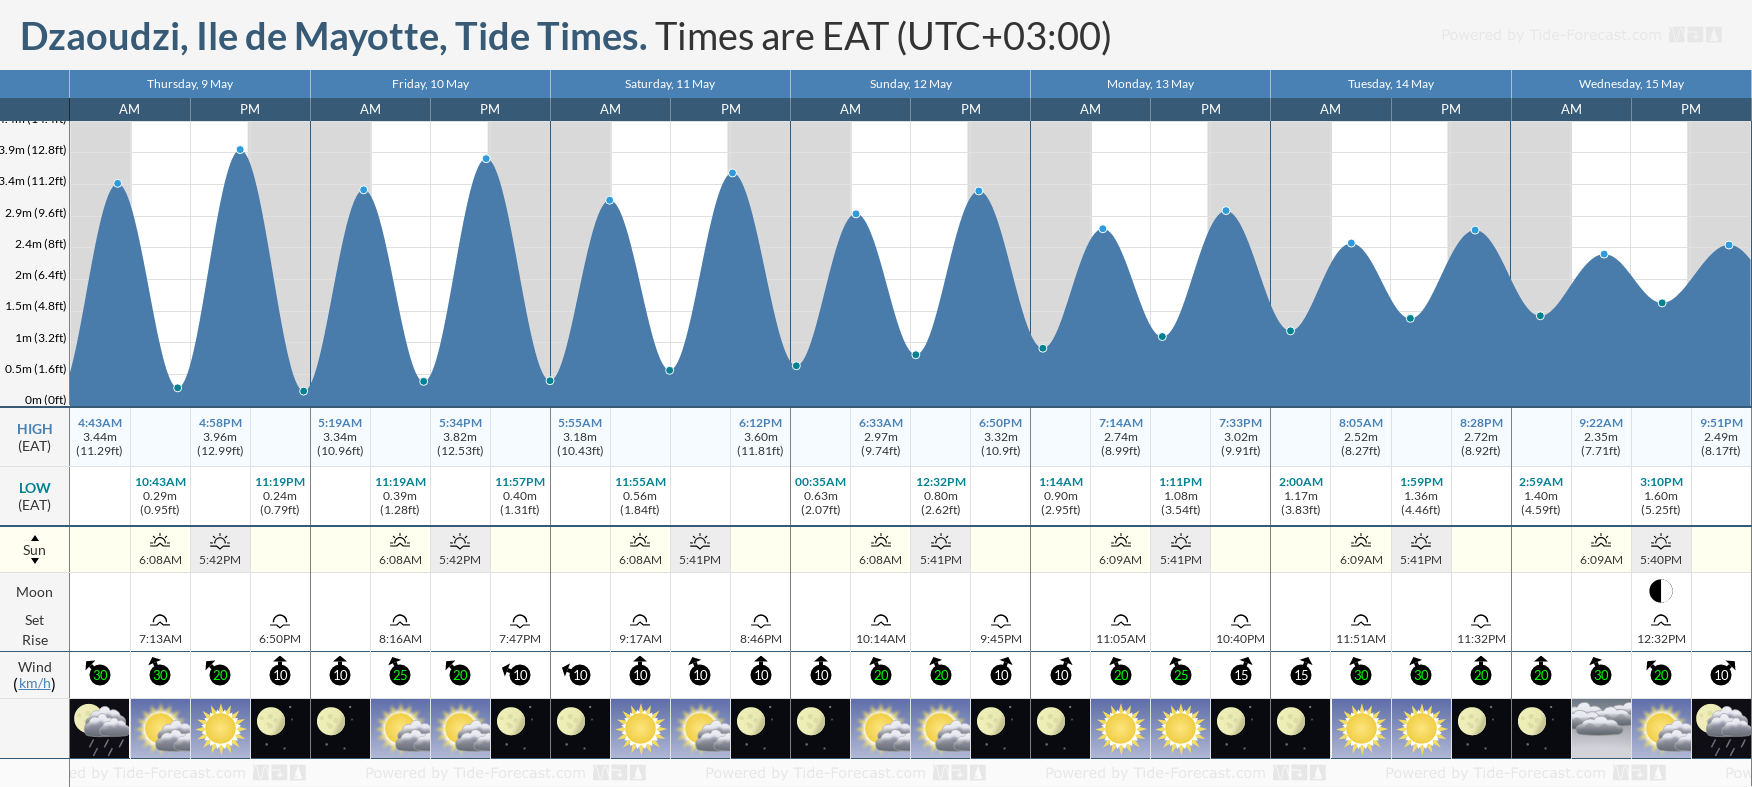 Dzaoudzi, Ile de Mayotte Tide Chart including high and low tide tide times for the next 7 days